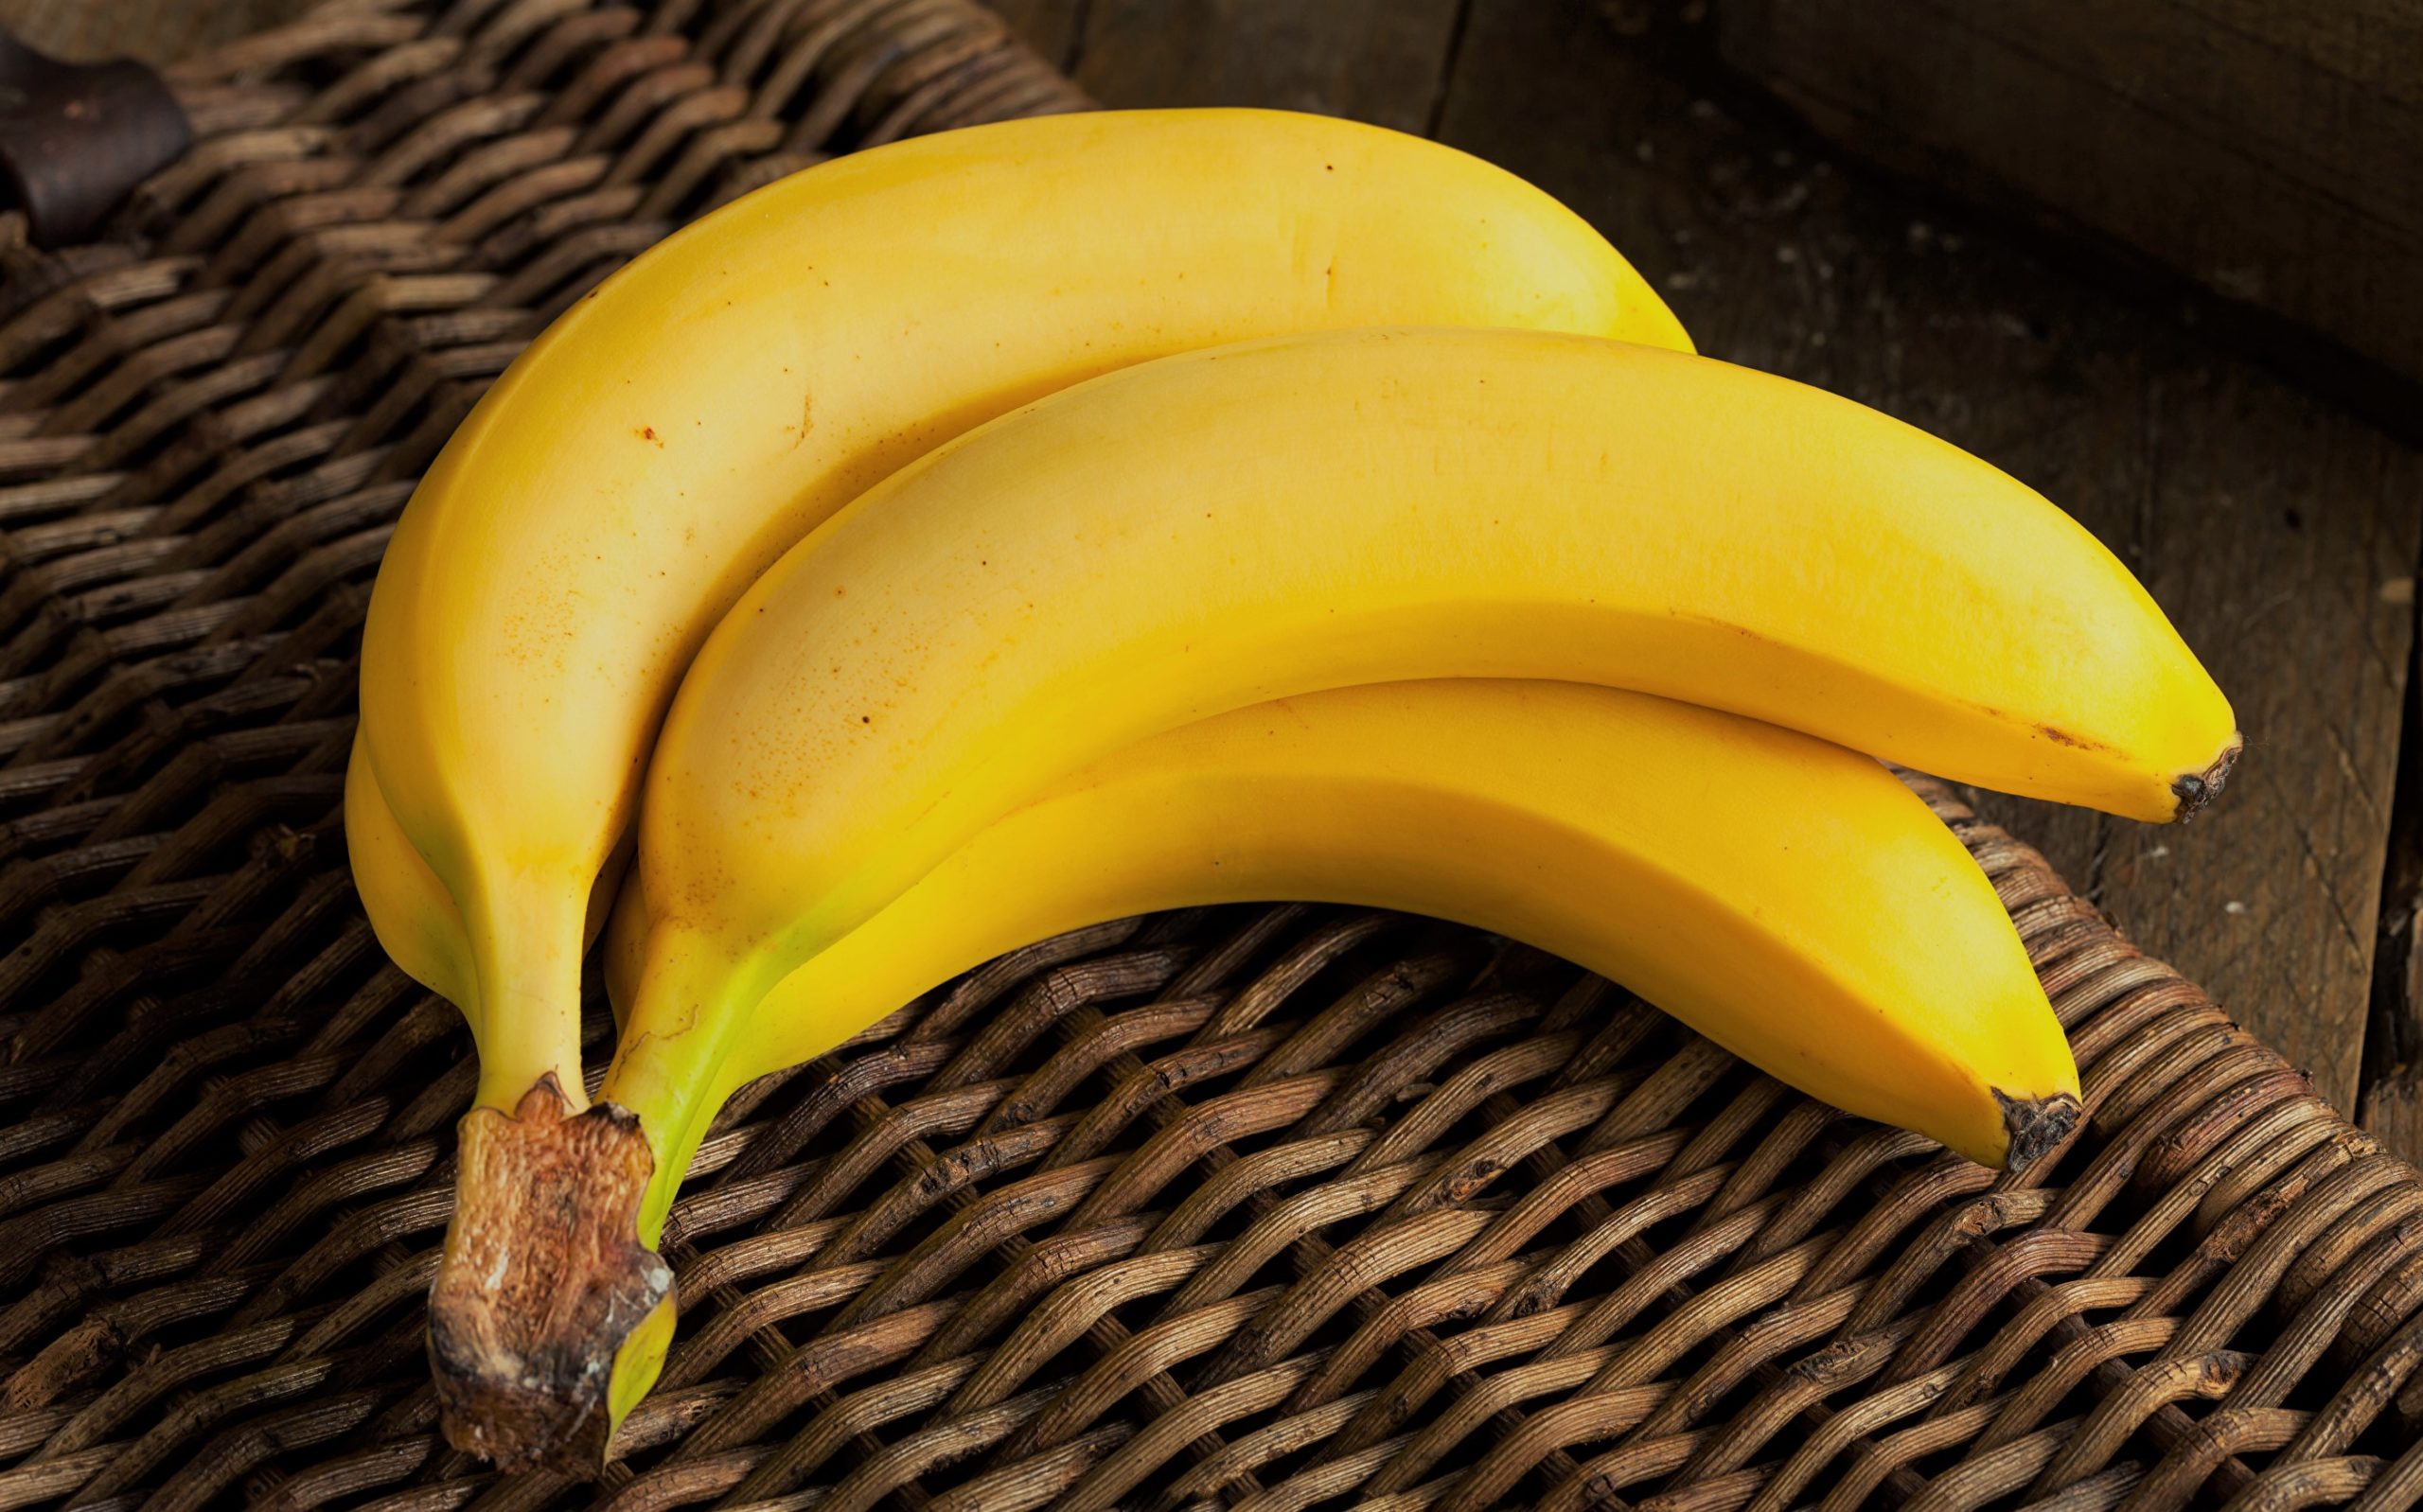 Go Bananas: The Wholesome Appeal of Organic Bananas!